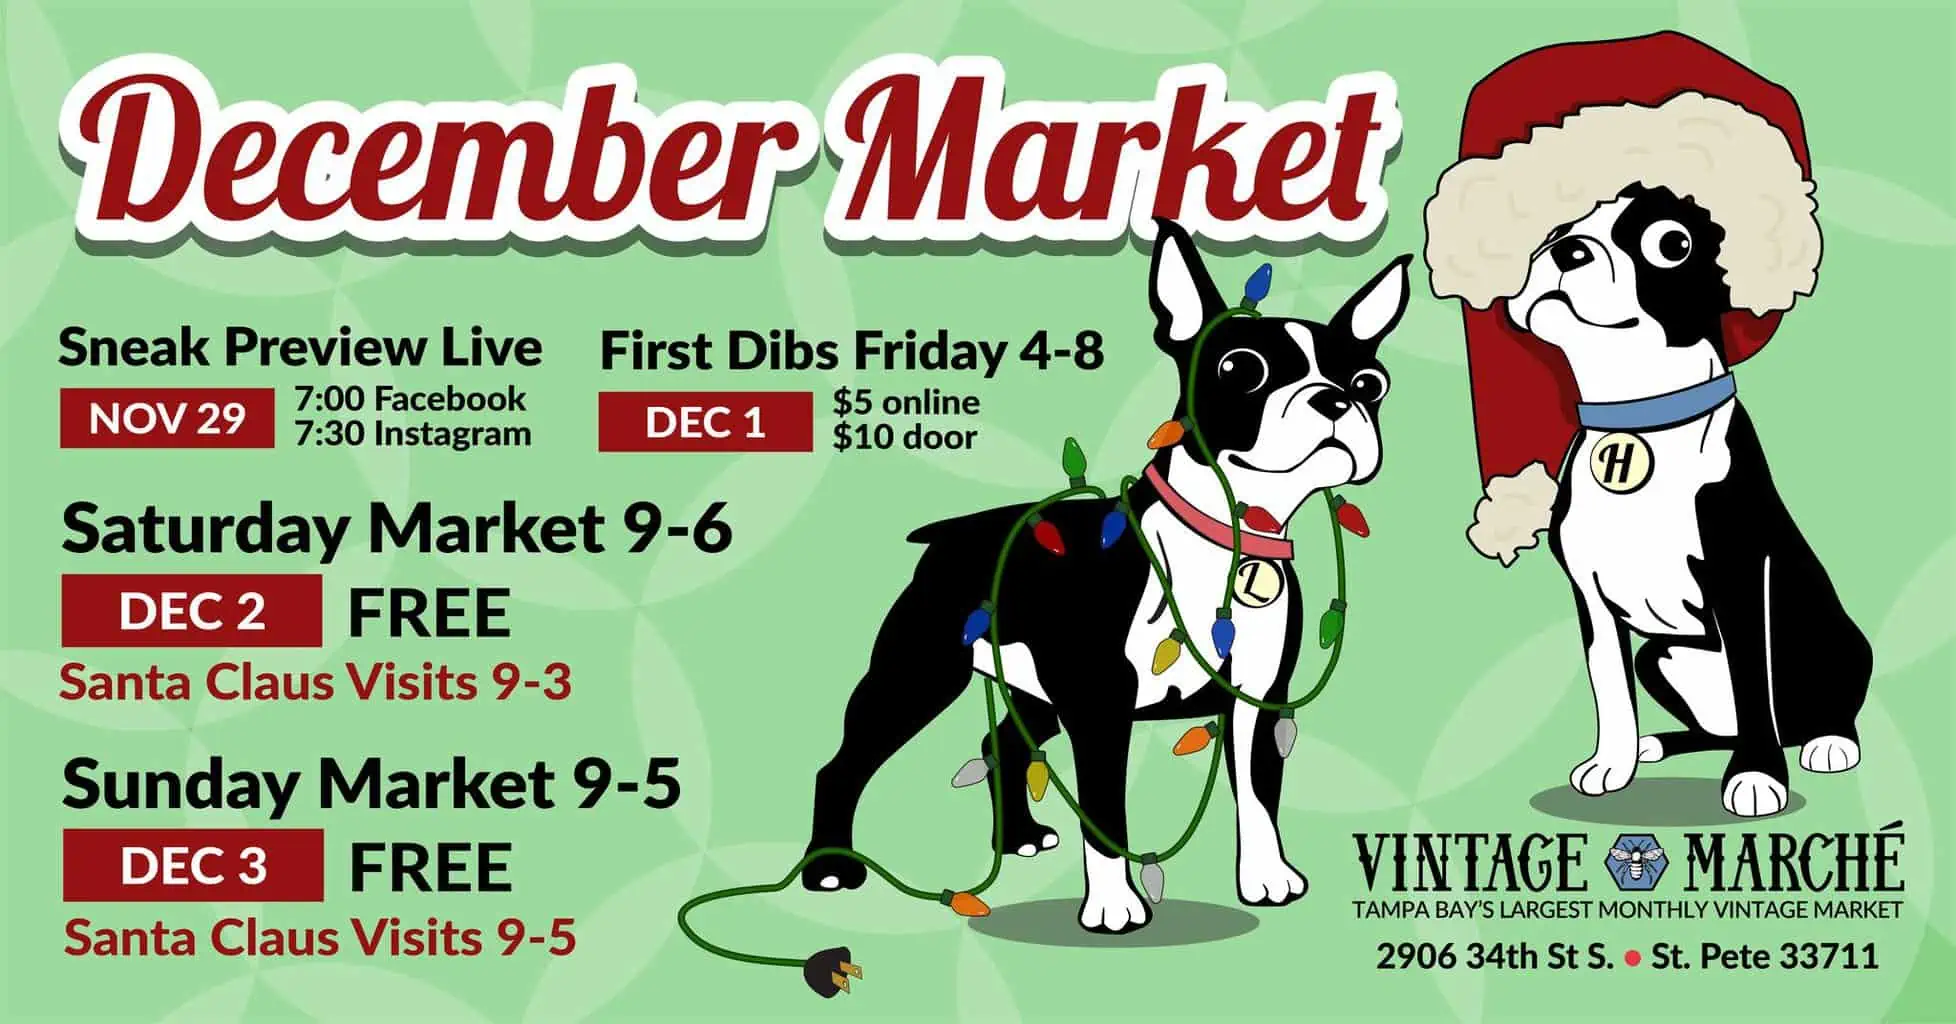 December Vintage Marche Market is all weekend long. Sneak preview live on Nov 29 on Facebook at 7pm and Instagram at 7:30pm. First Dibs Friday 4pm-8pm on Dec 1 - $5 onlinr or $10 at the door. Saturday Market 9am-6pm on Dec 2 and a Santa Claus visits from 9am-3pm. Sunday Market 9am-5pm on Dec 3 and santa claus visits 9am-5pm.